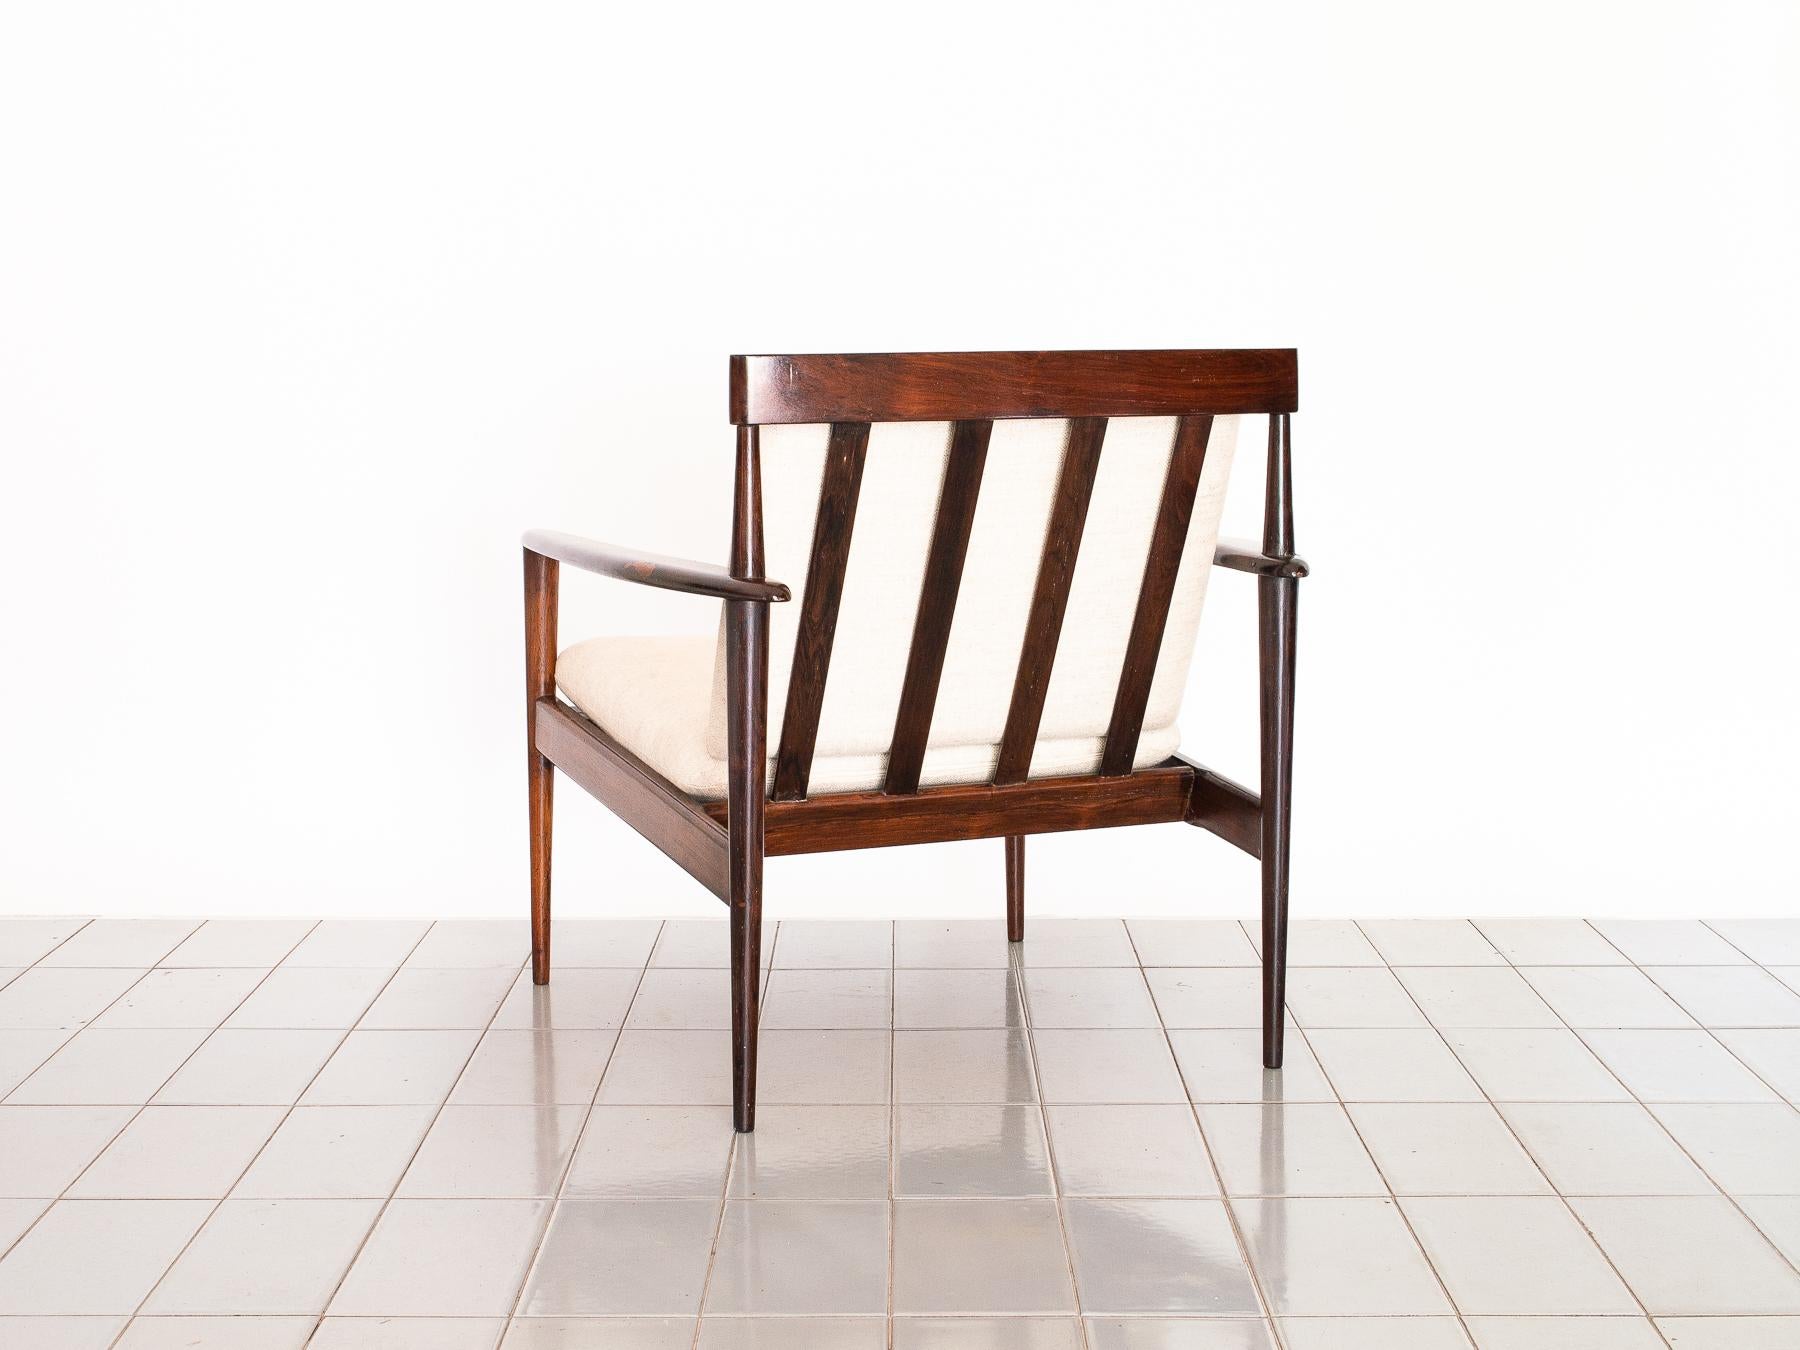 20th Century 1950s Lounge Chair in Rosewood, Grete Jalk Design, Brazilian Production